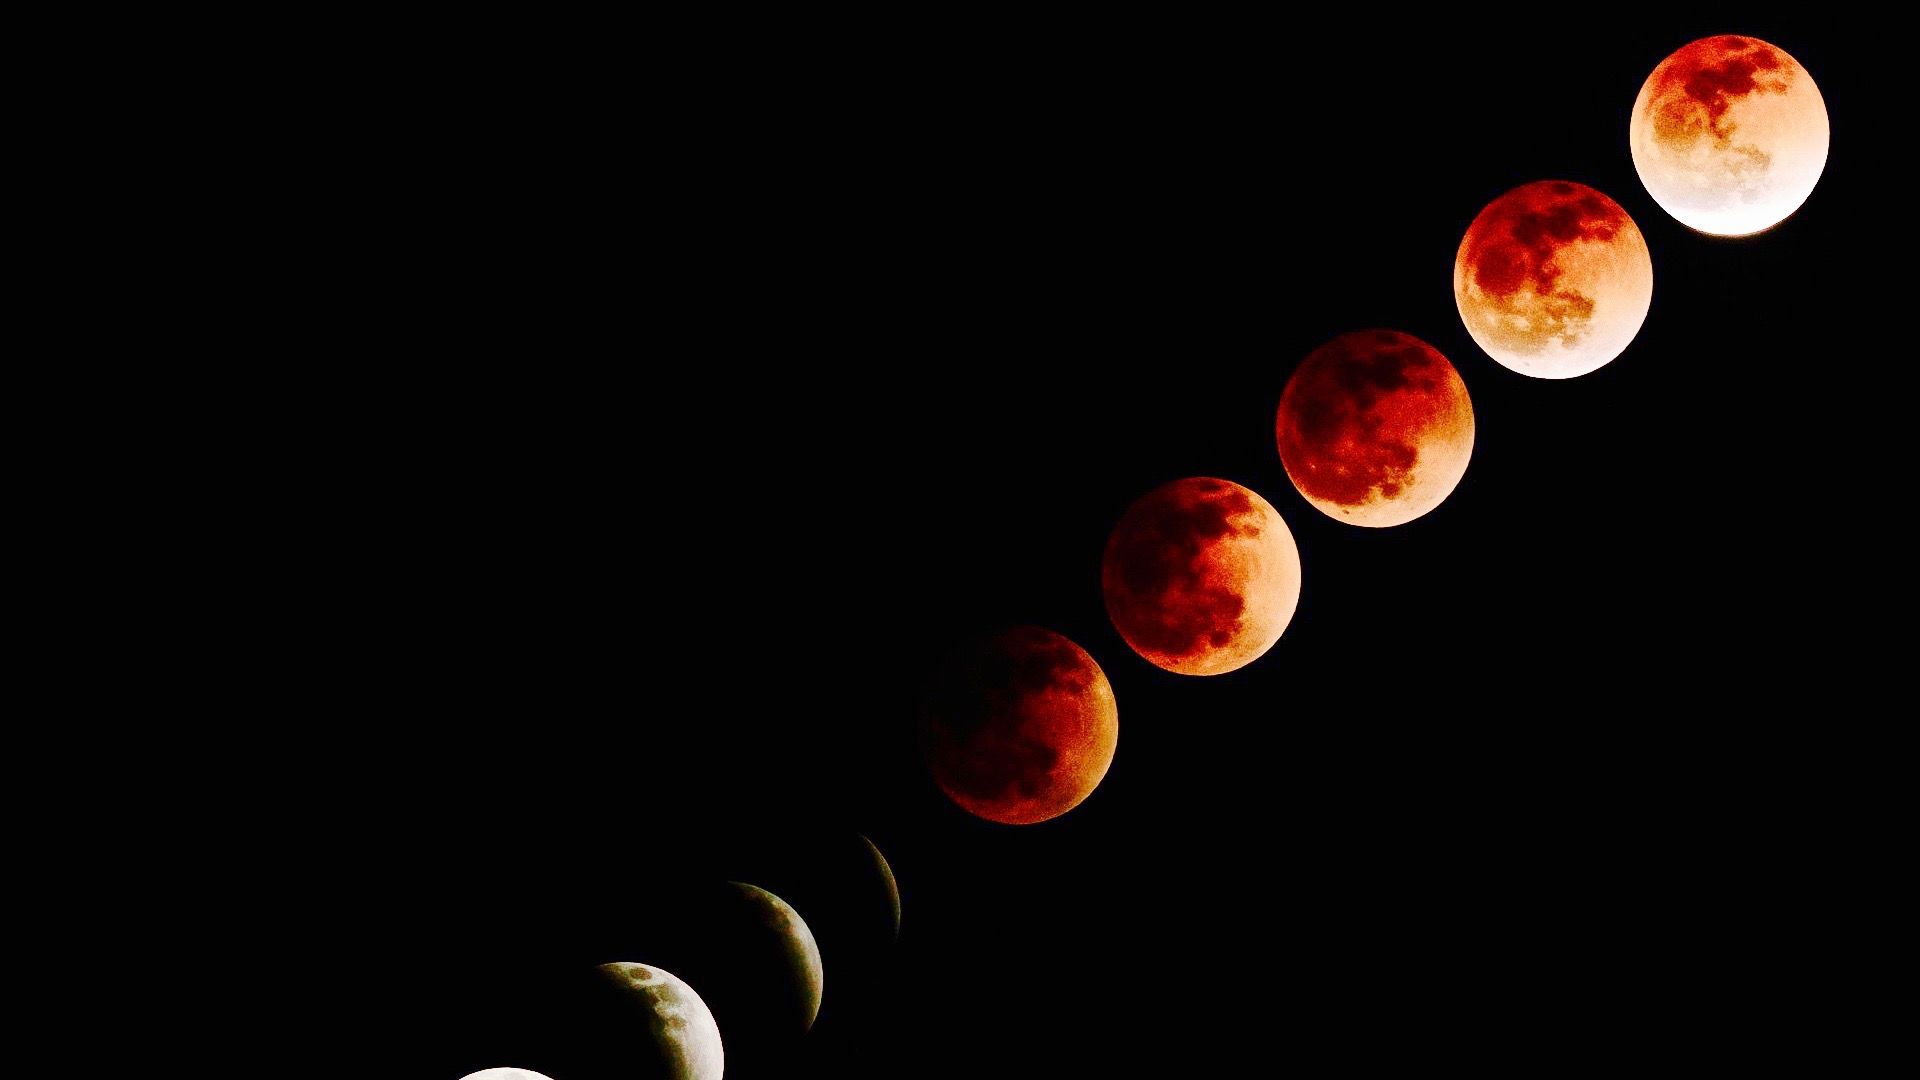 Blue moon lunar eclipse: How a blood moon in 1504 shaped the world ...